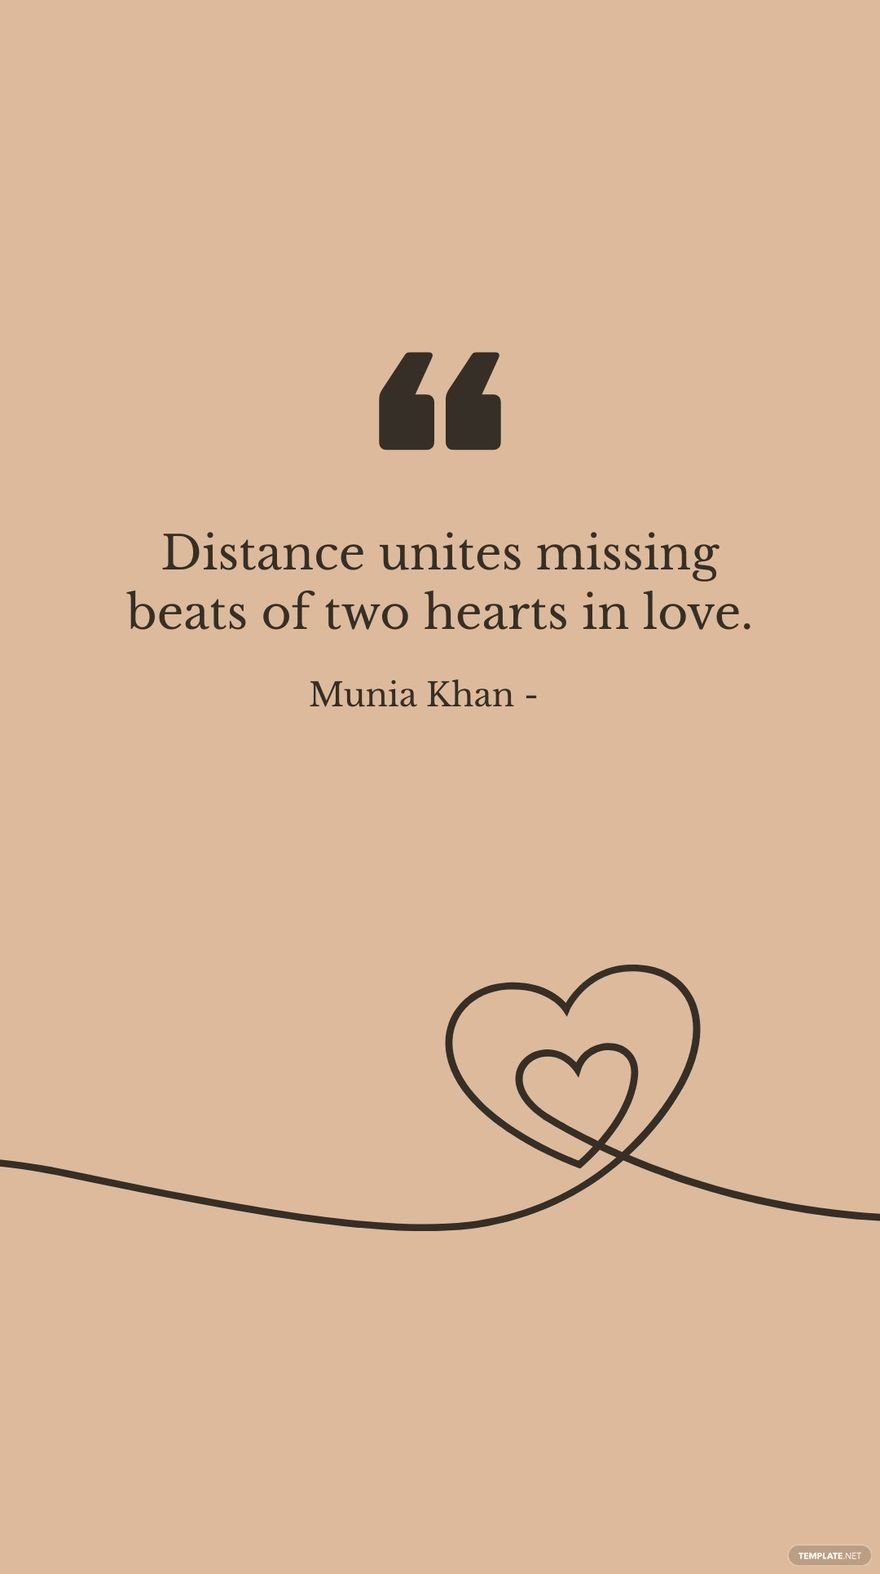 Munia Khan - Distance unites missing beats of two hearts in love.